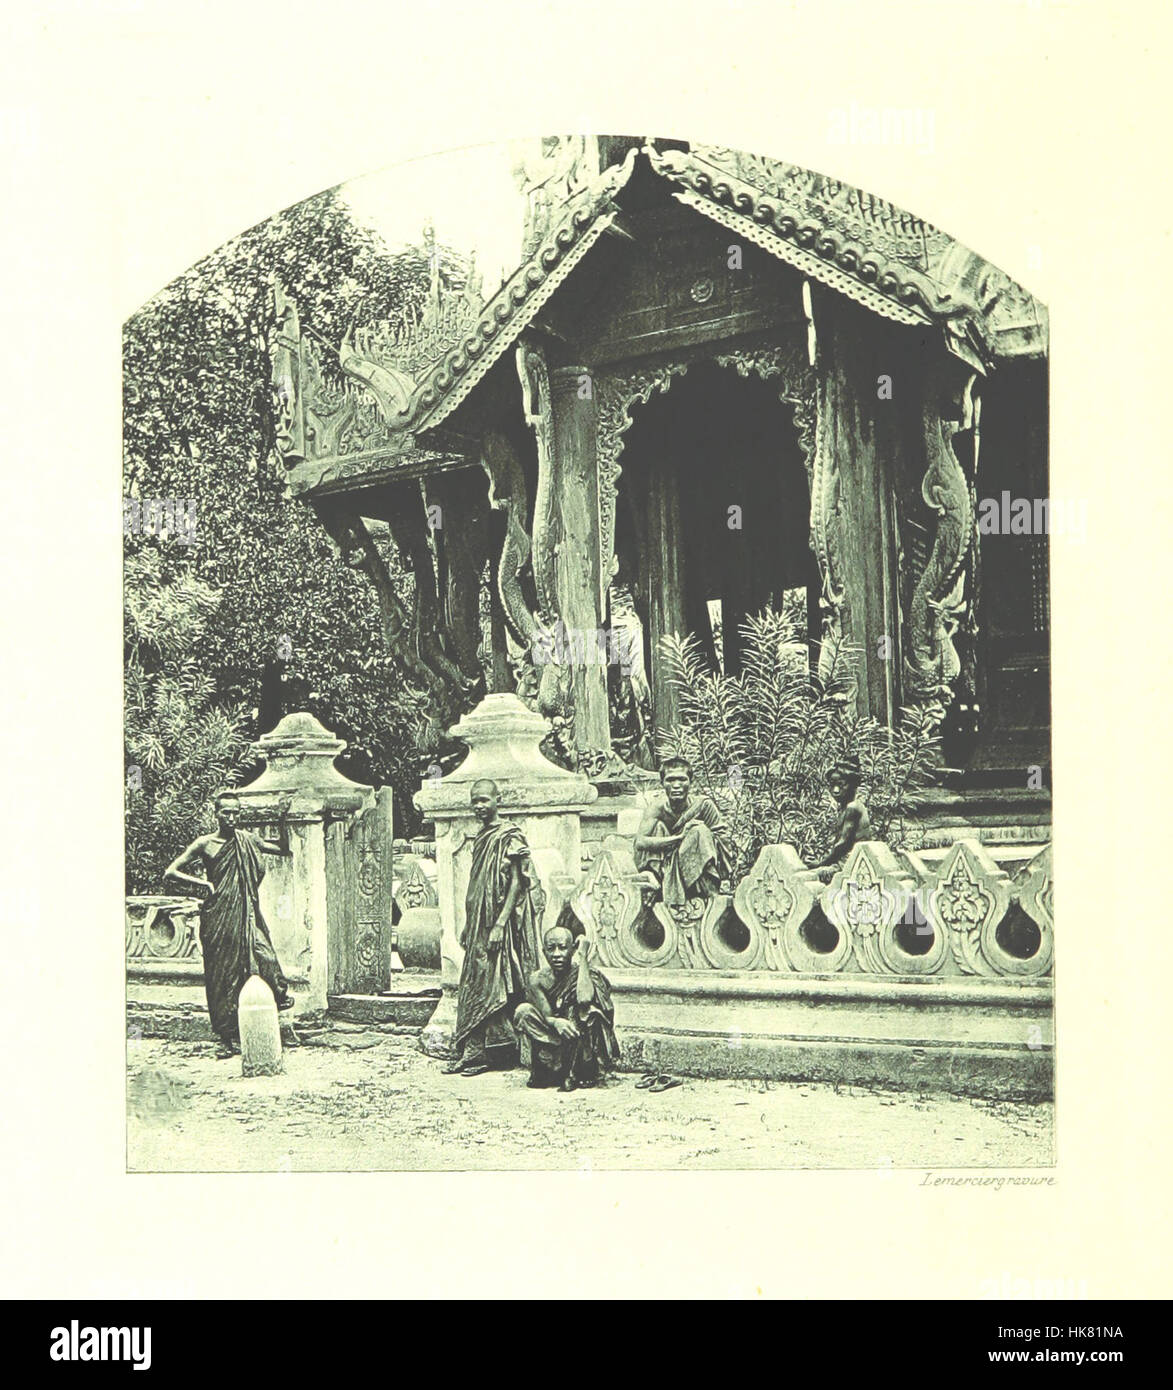 Image taken from page 364 of 'Picturesque Burma, past and present. [With illustrations.]' Image taken from page 364 of 'Picturesque Bur Stock Photo